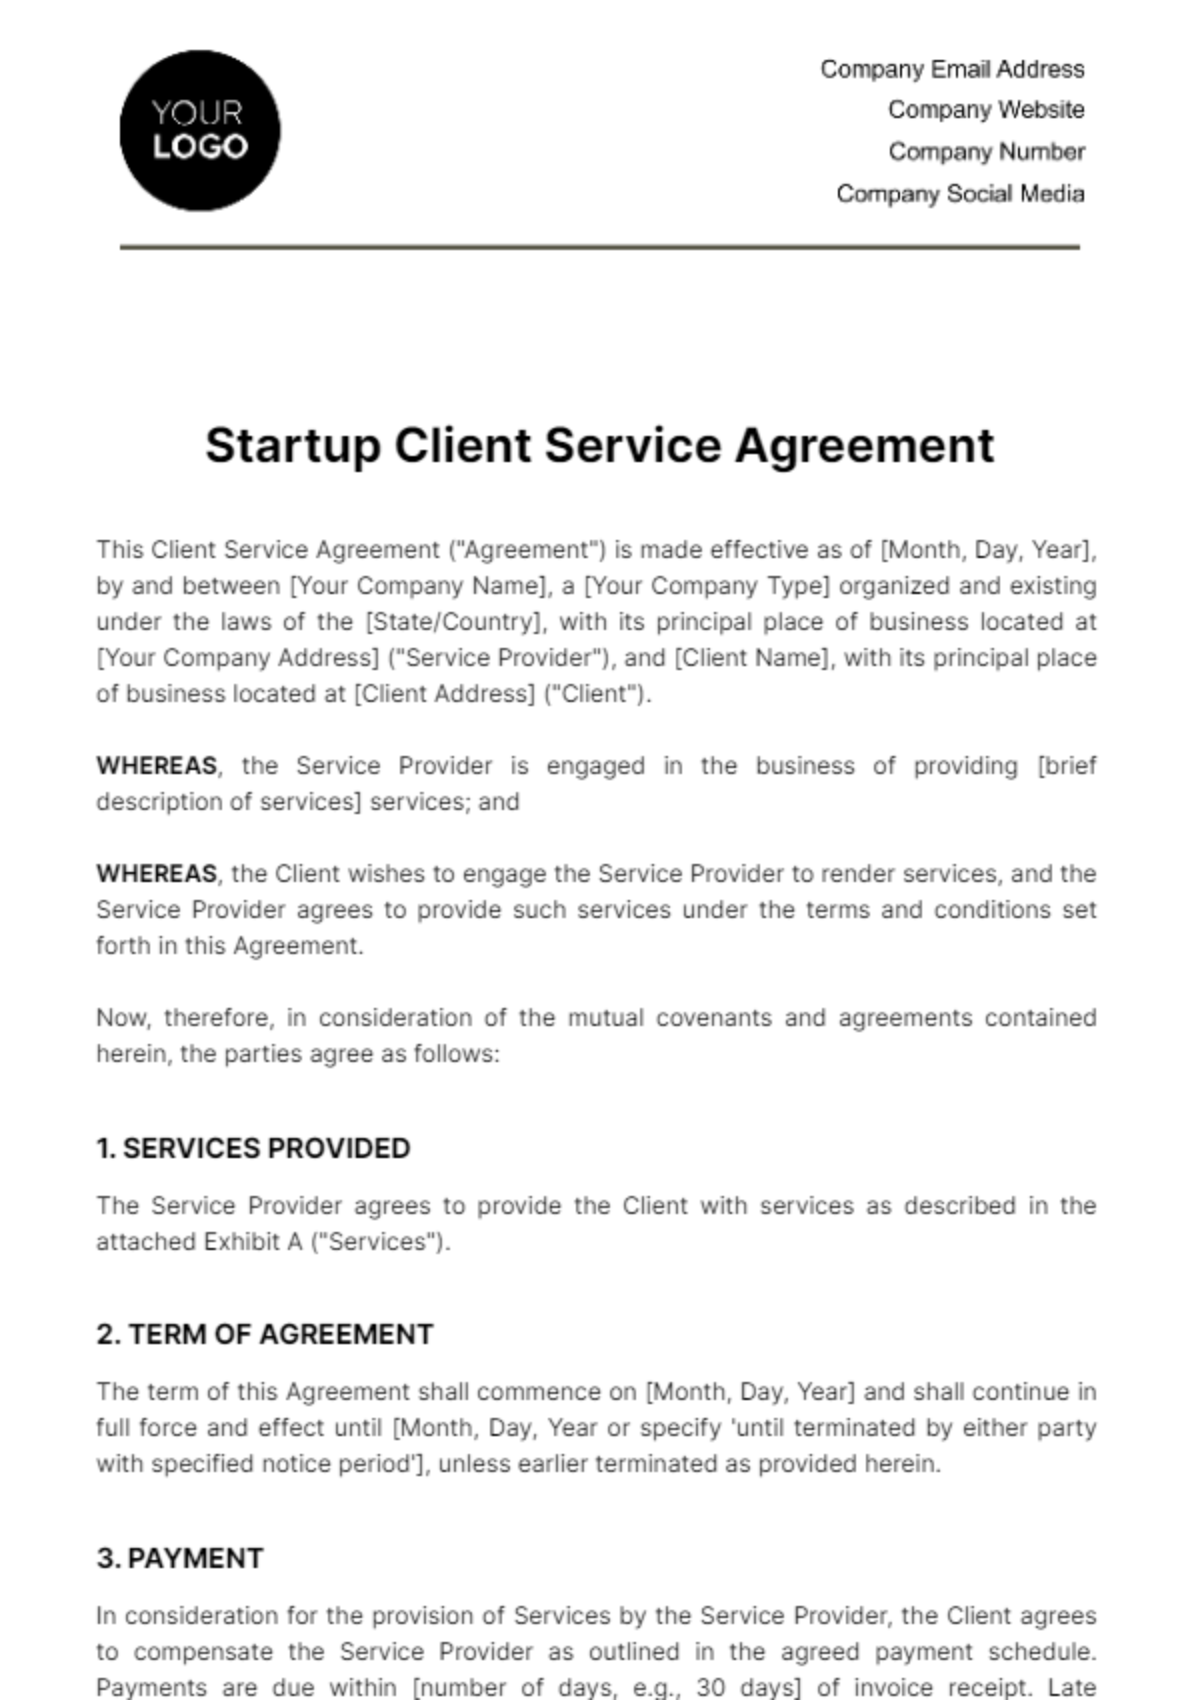 Free Startup Client Service Agreement Template